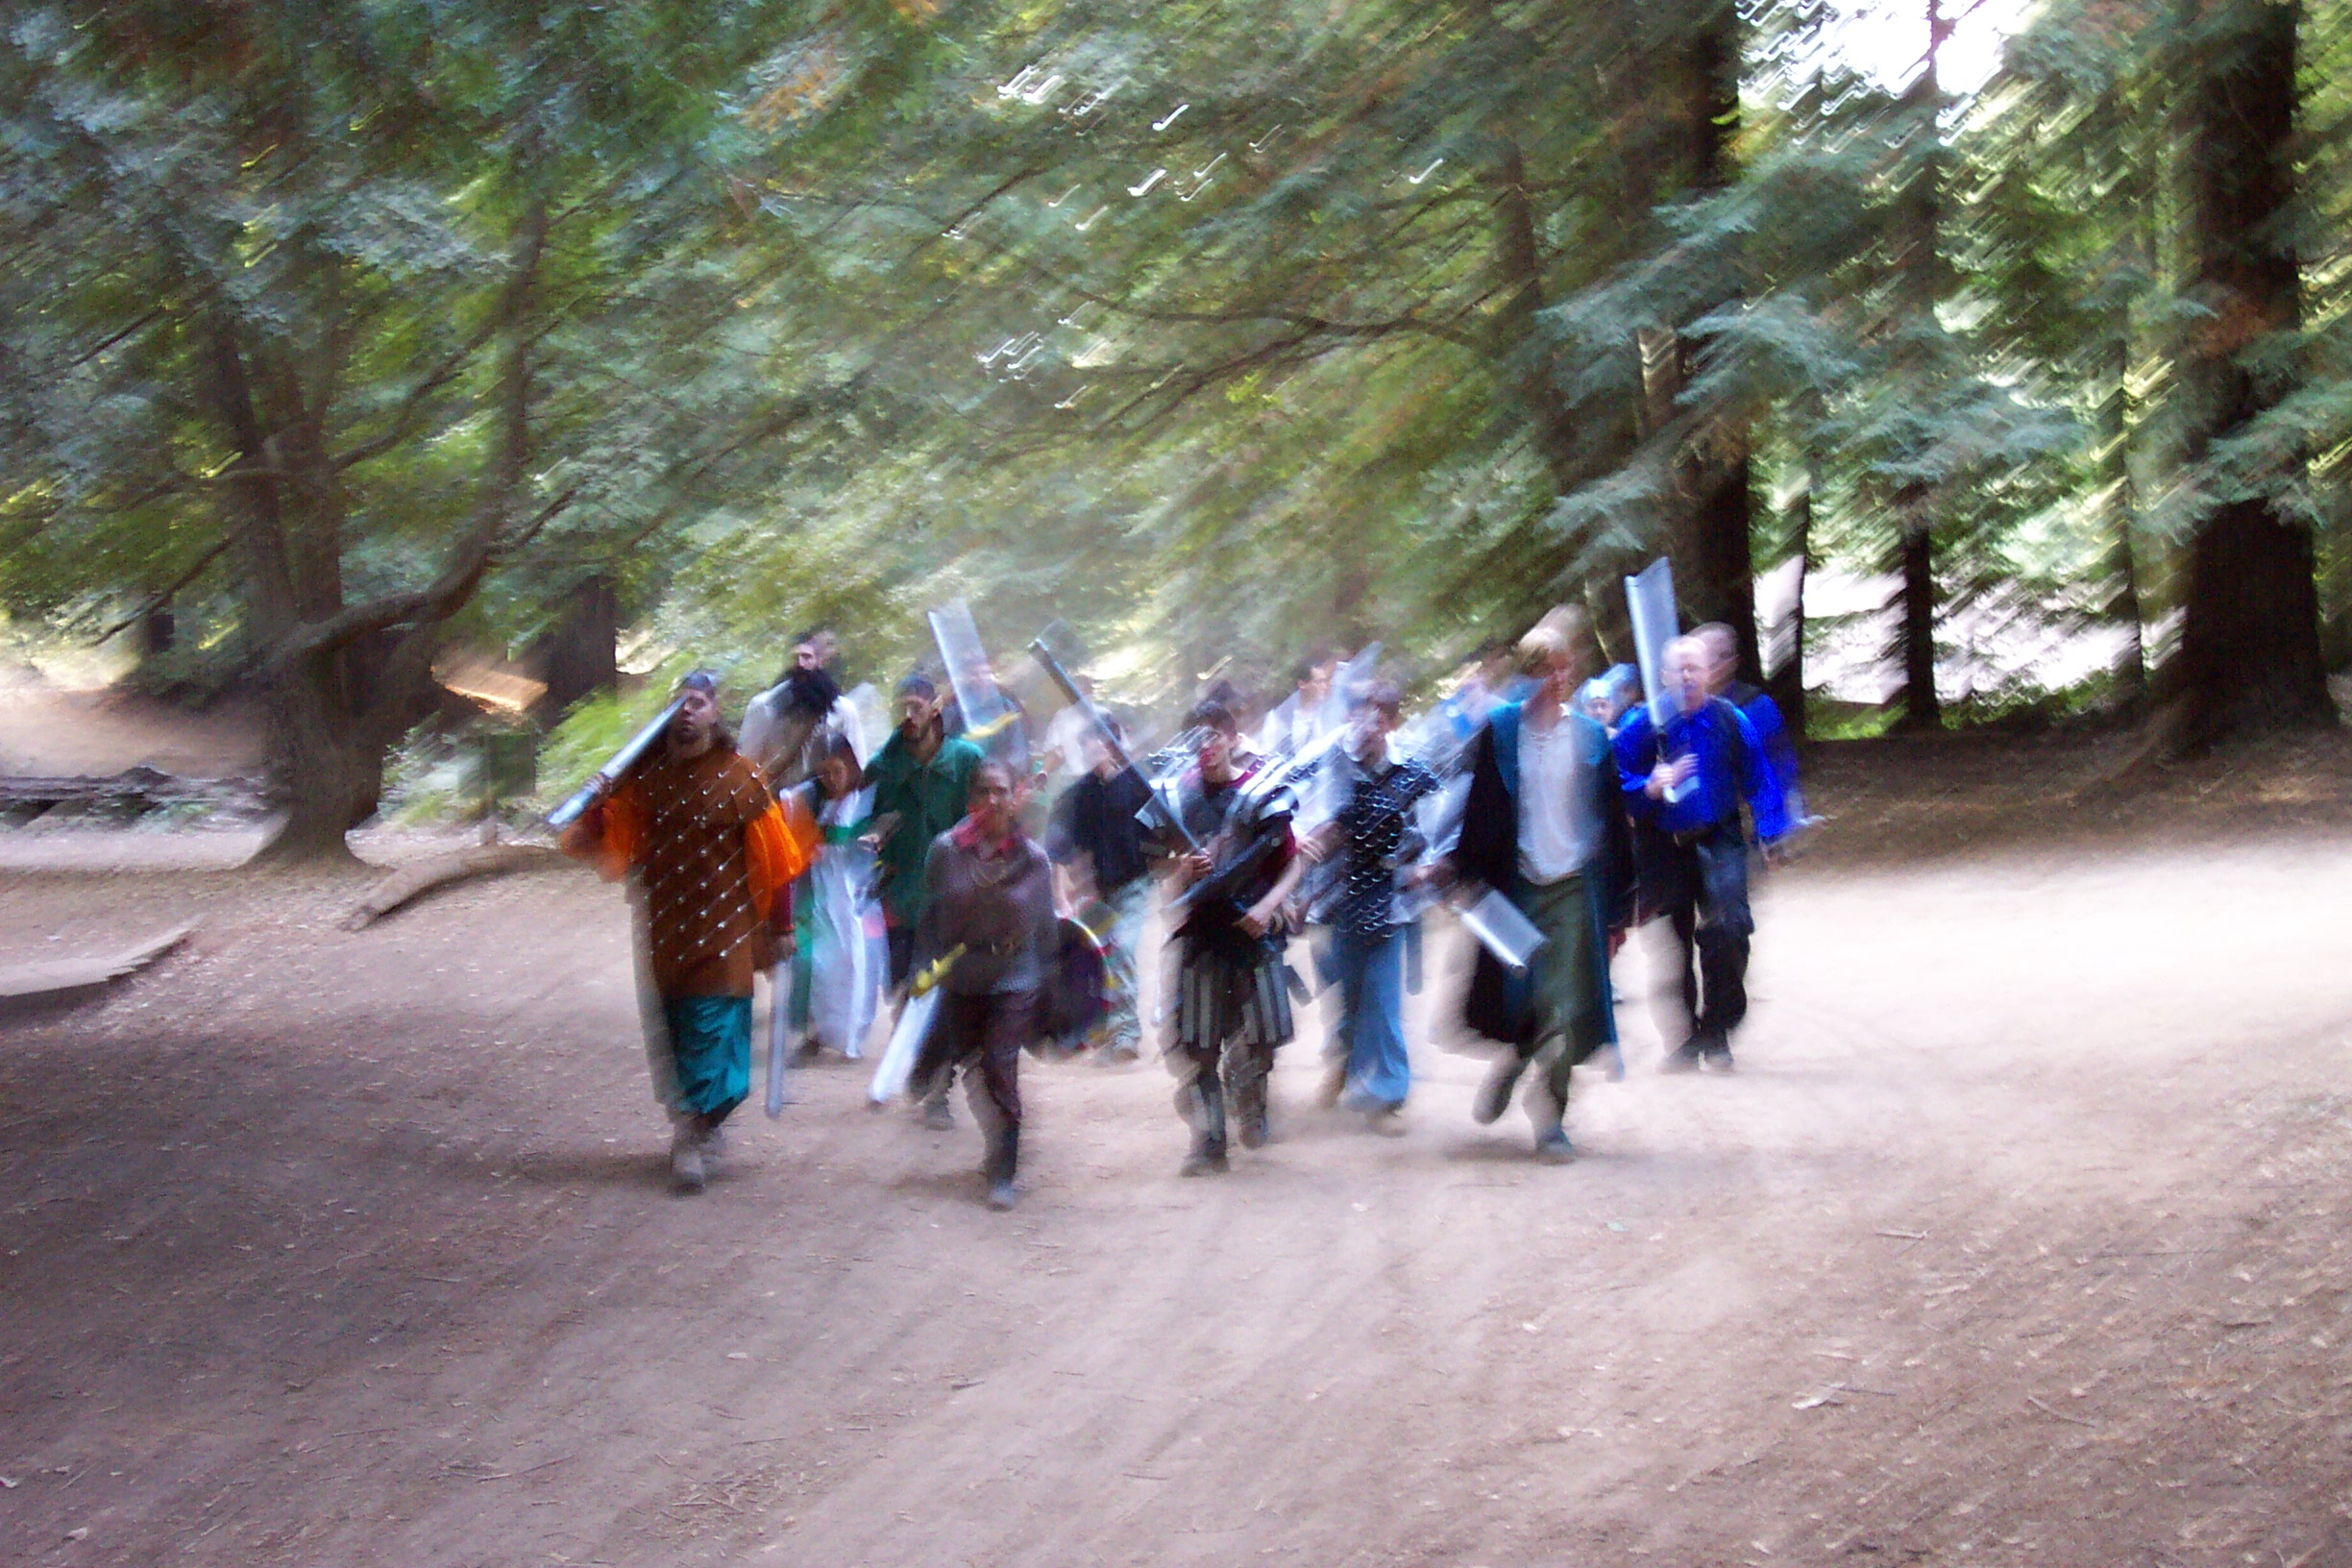 Adventurers march along the road.